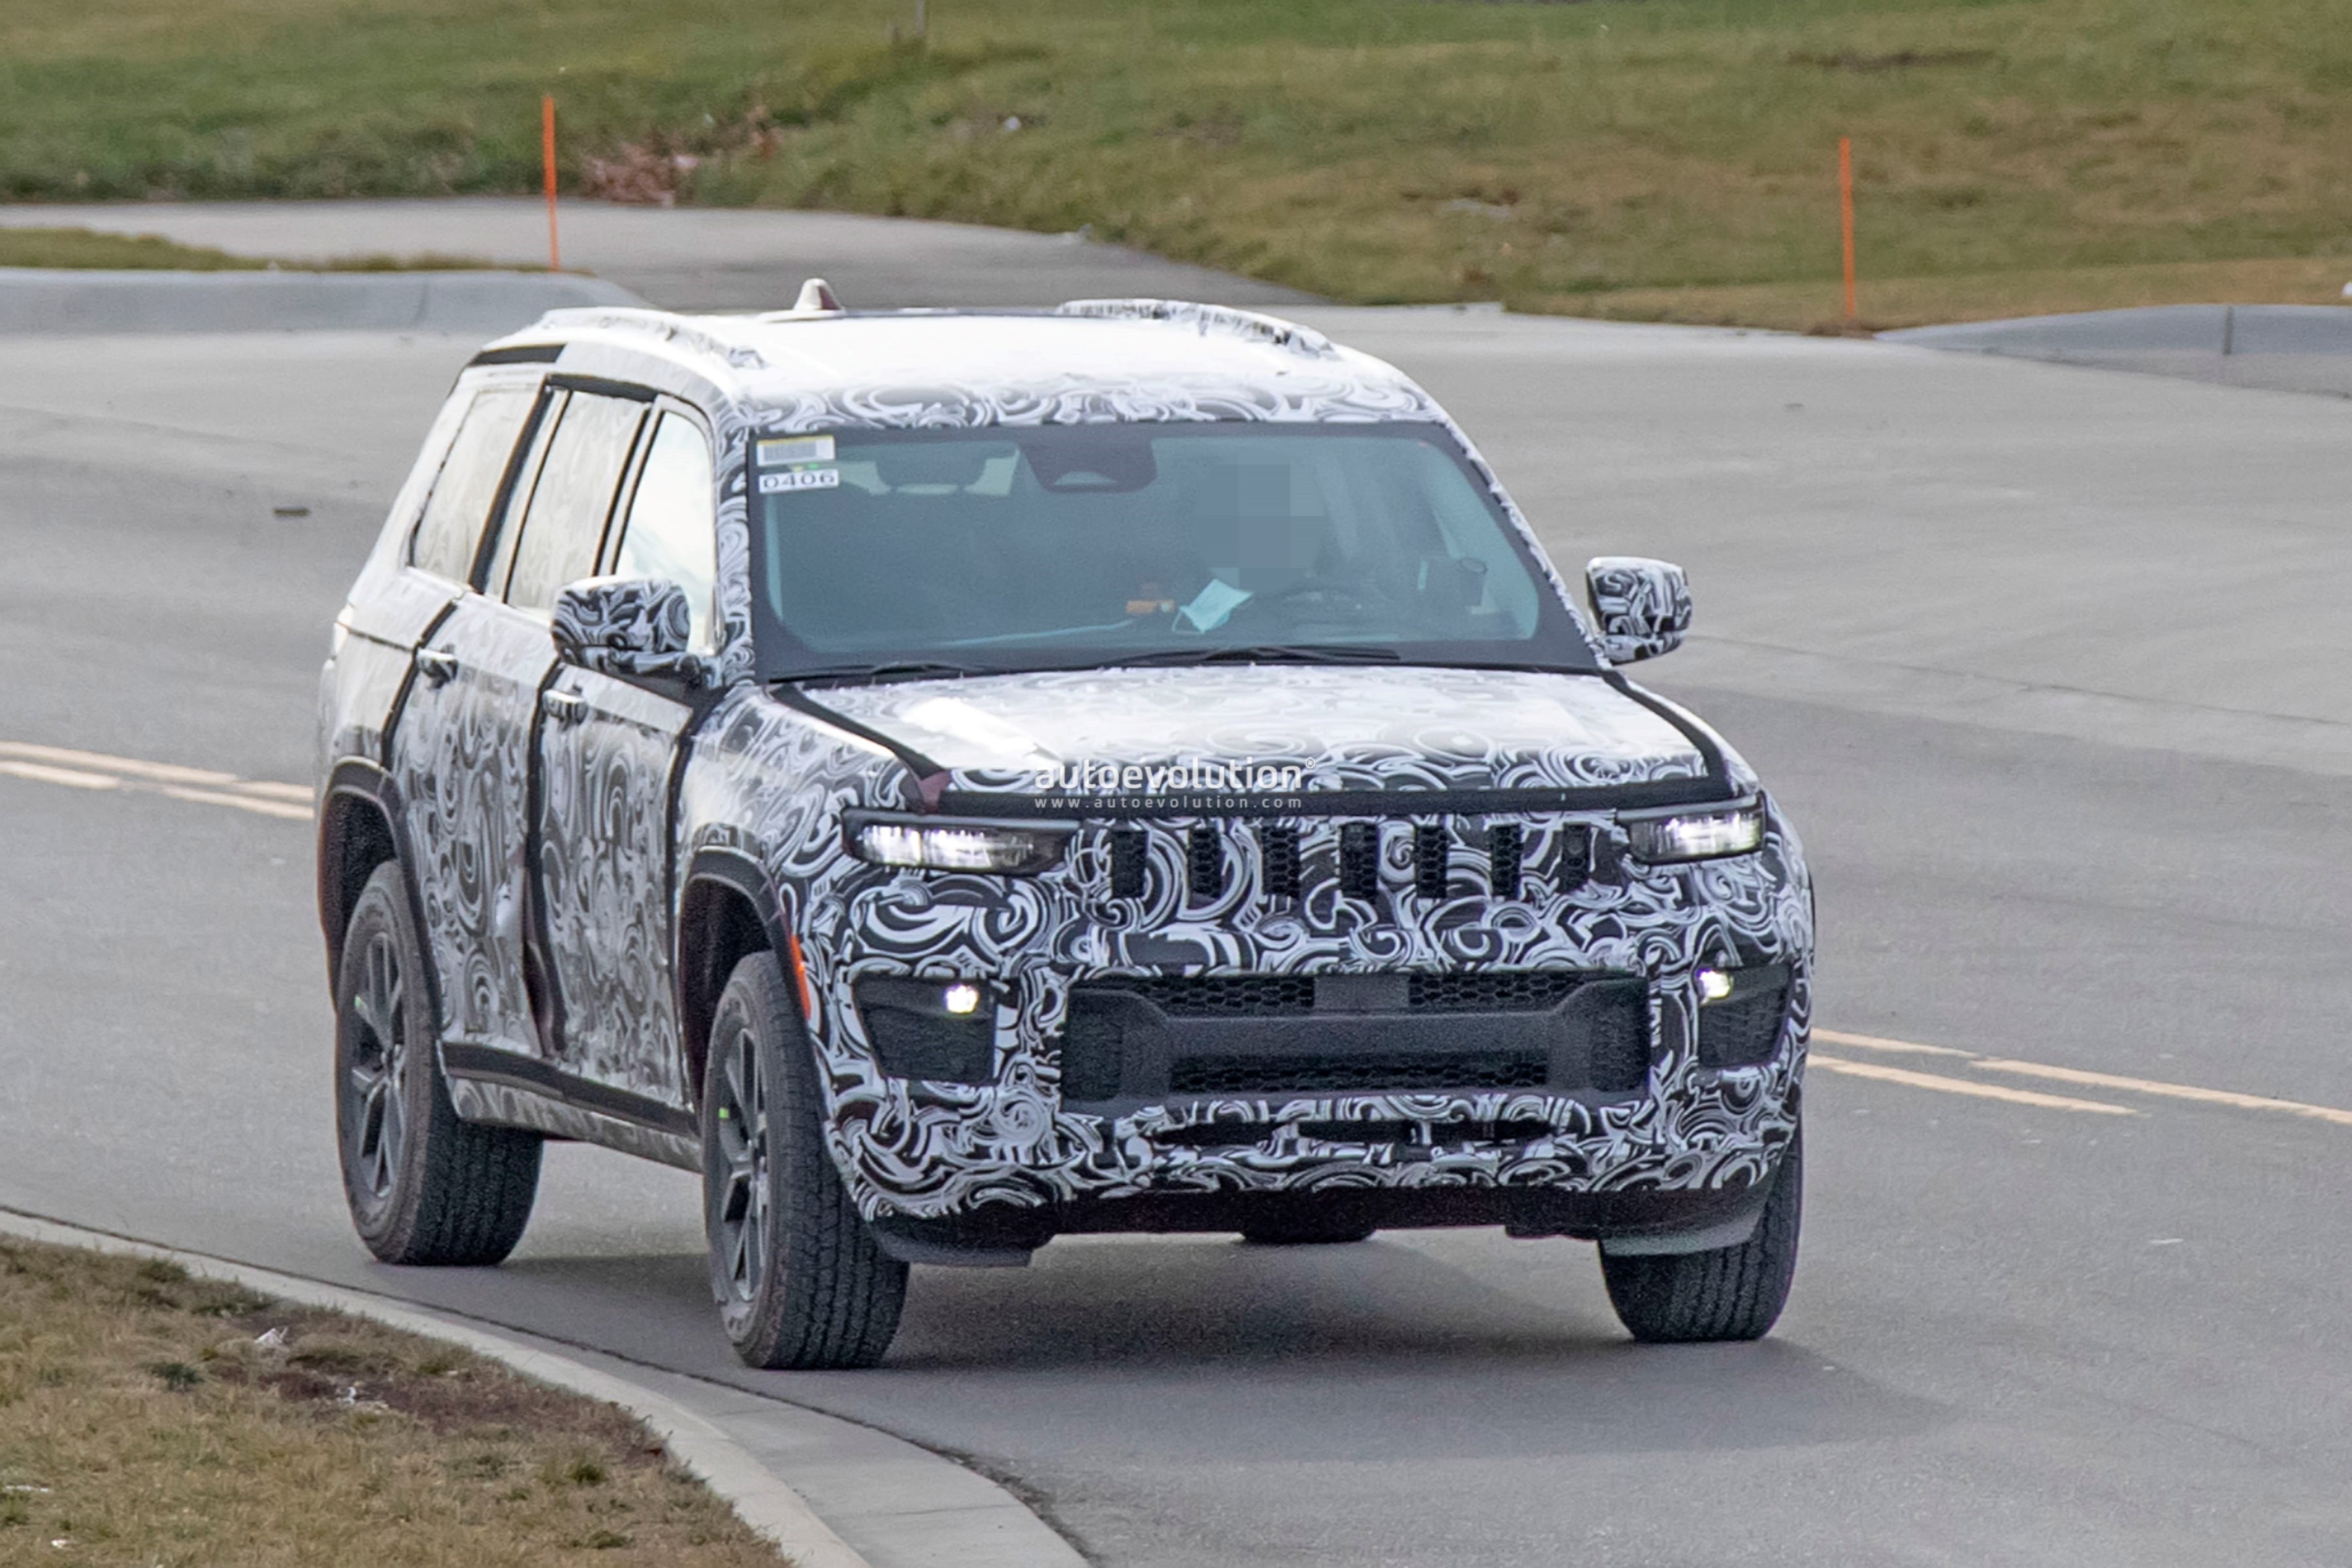 2022 Jeep Grand Cherokee (WL) Spied With Grand Wagoneer Styling Cues